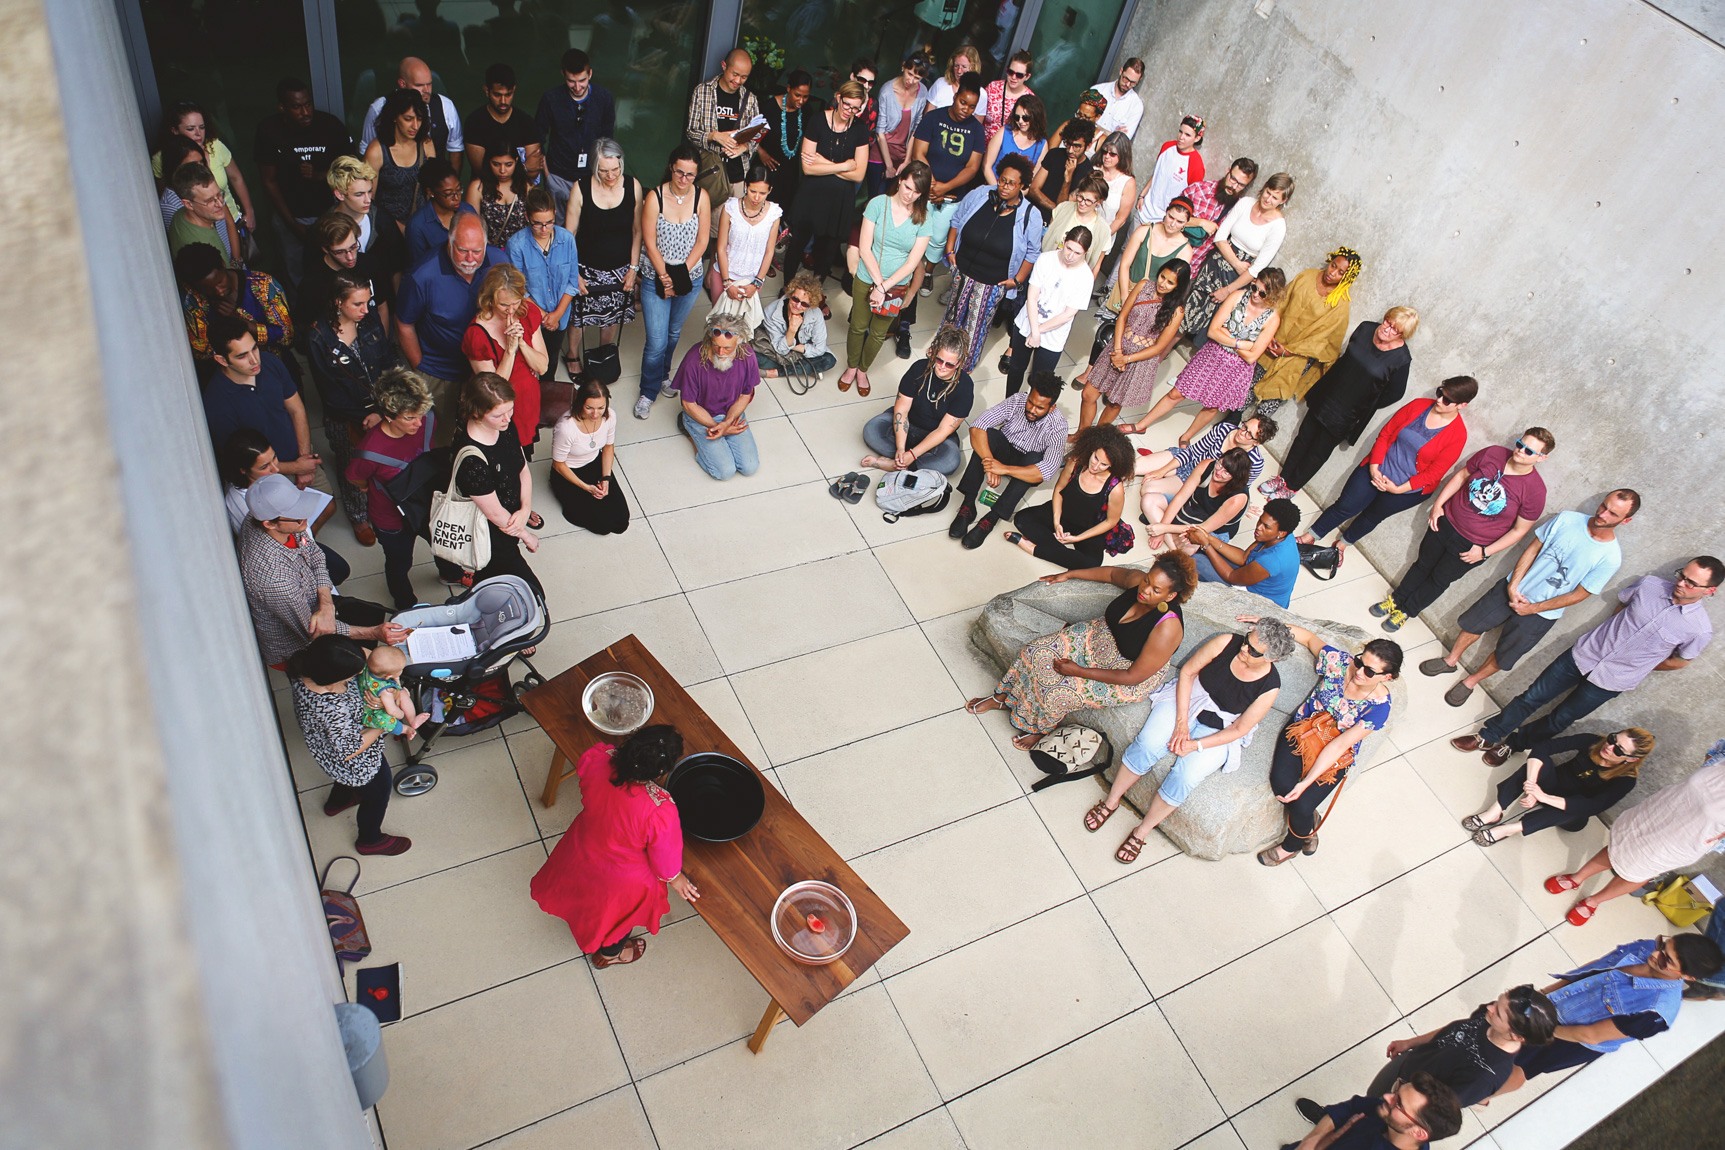 An aerial view of Bhanu Kapil performing a ritual in the Water Court for a large crowd.